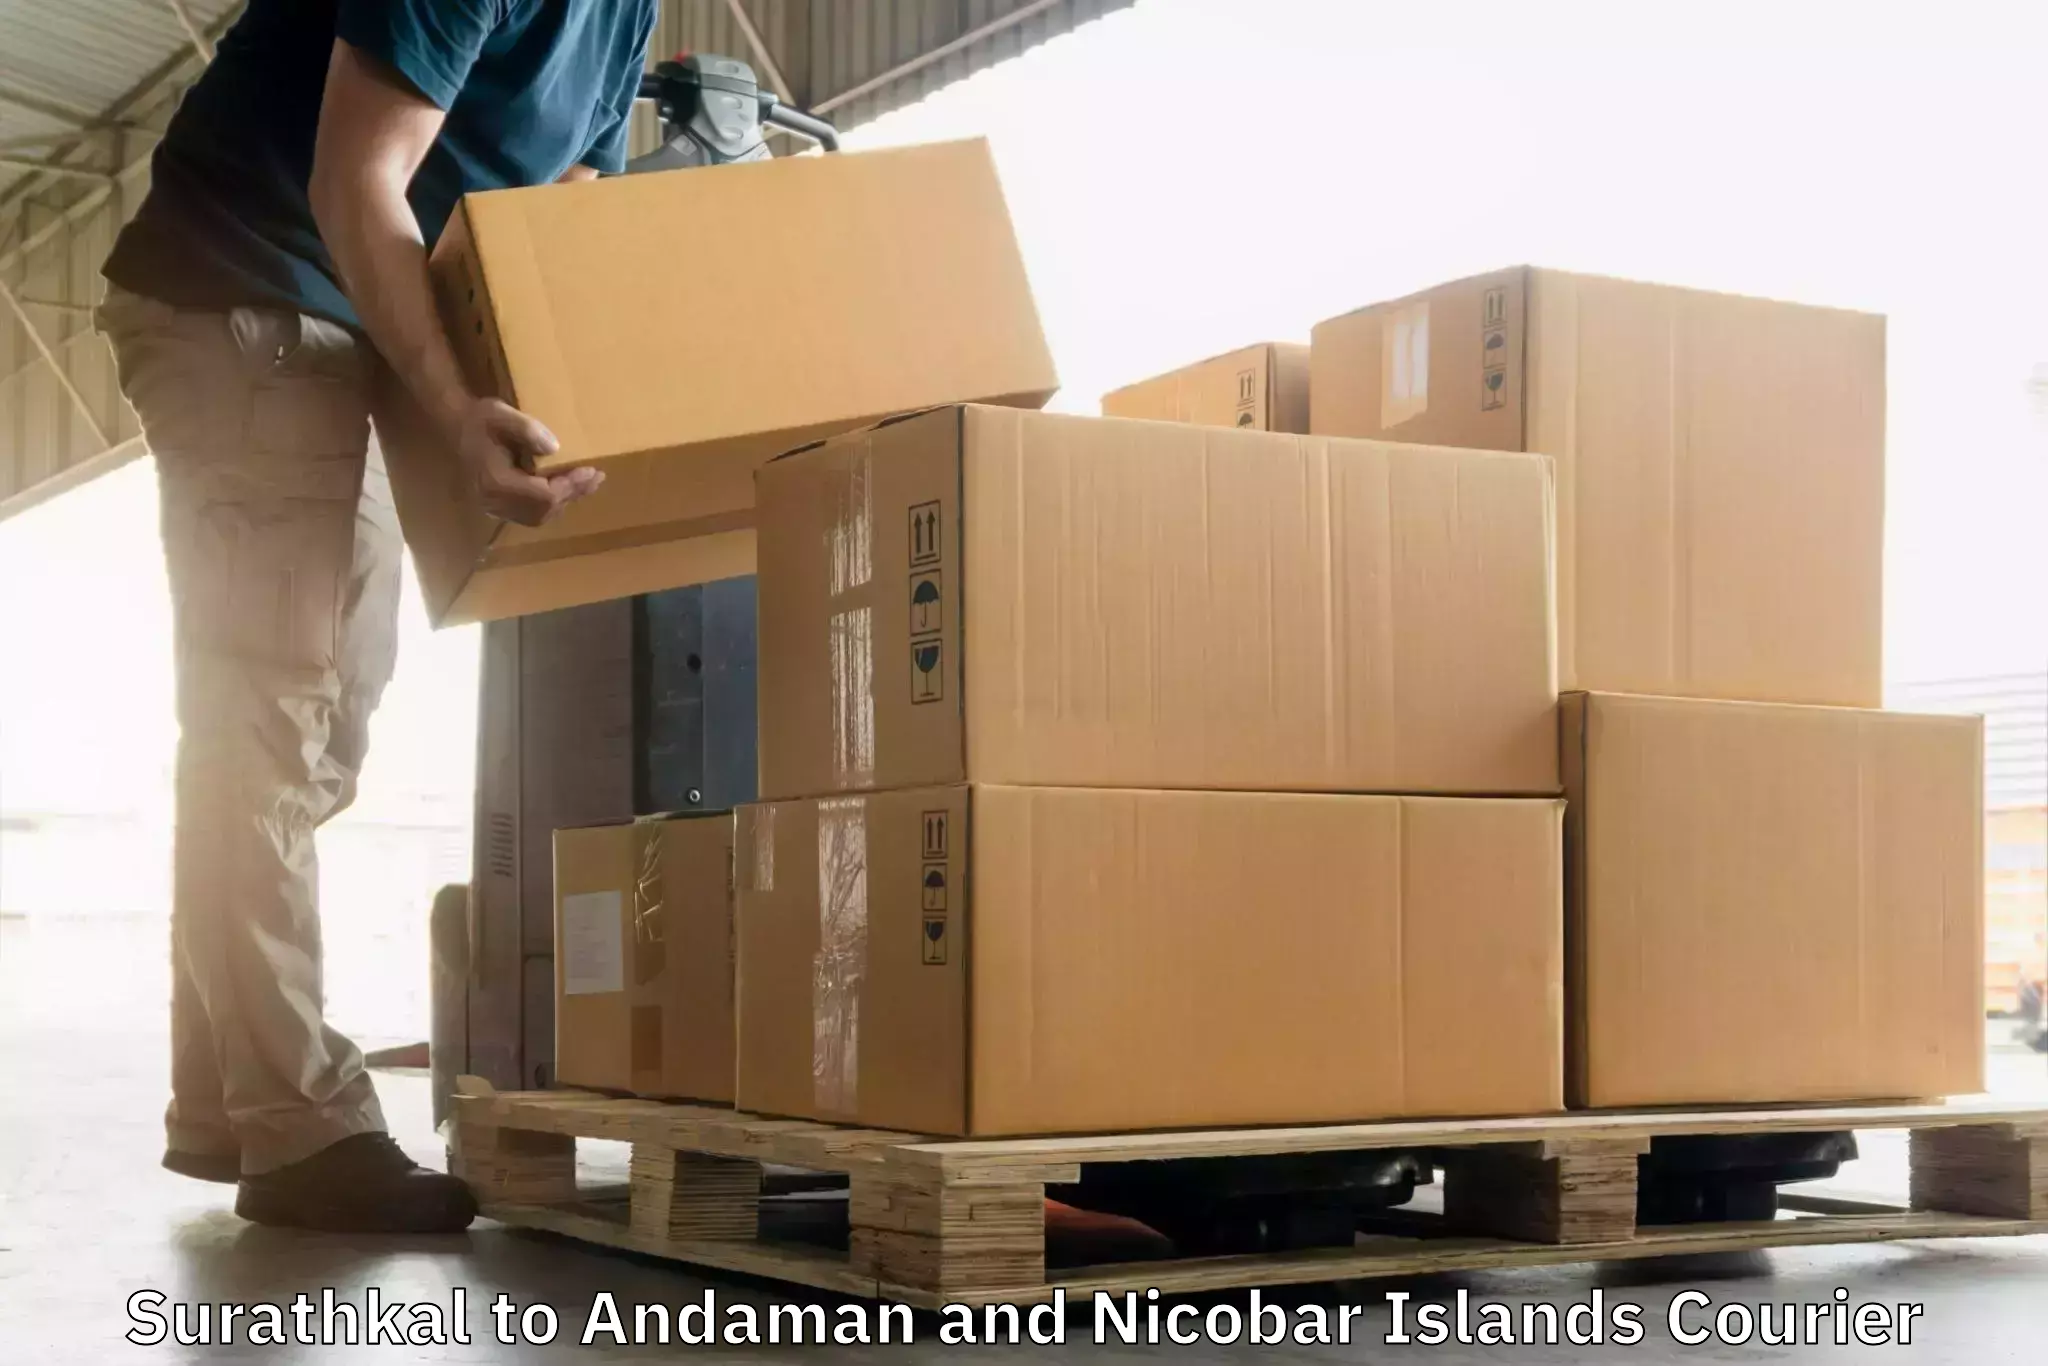 Reliable parcel services Surathkal to Andaman and Nicobar Islands